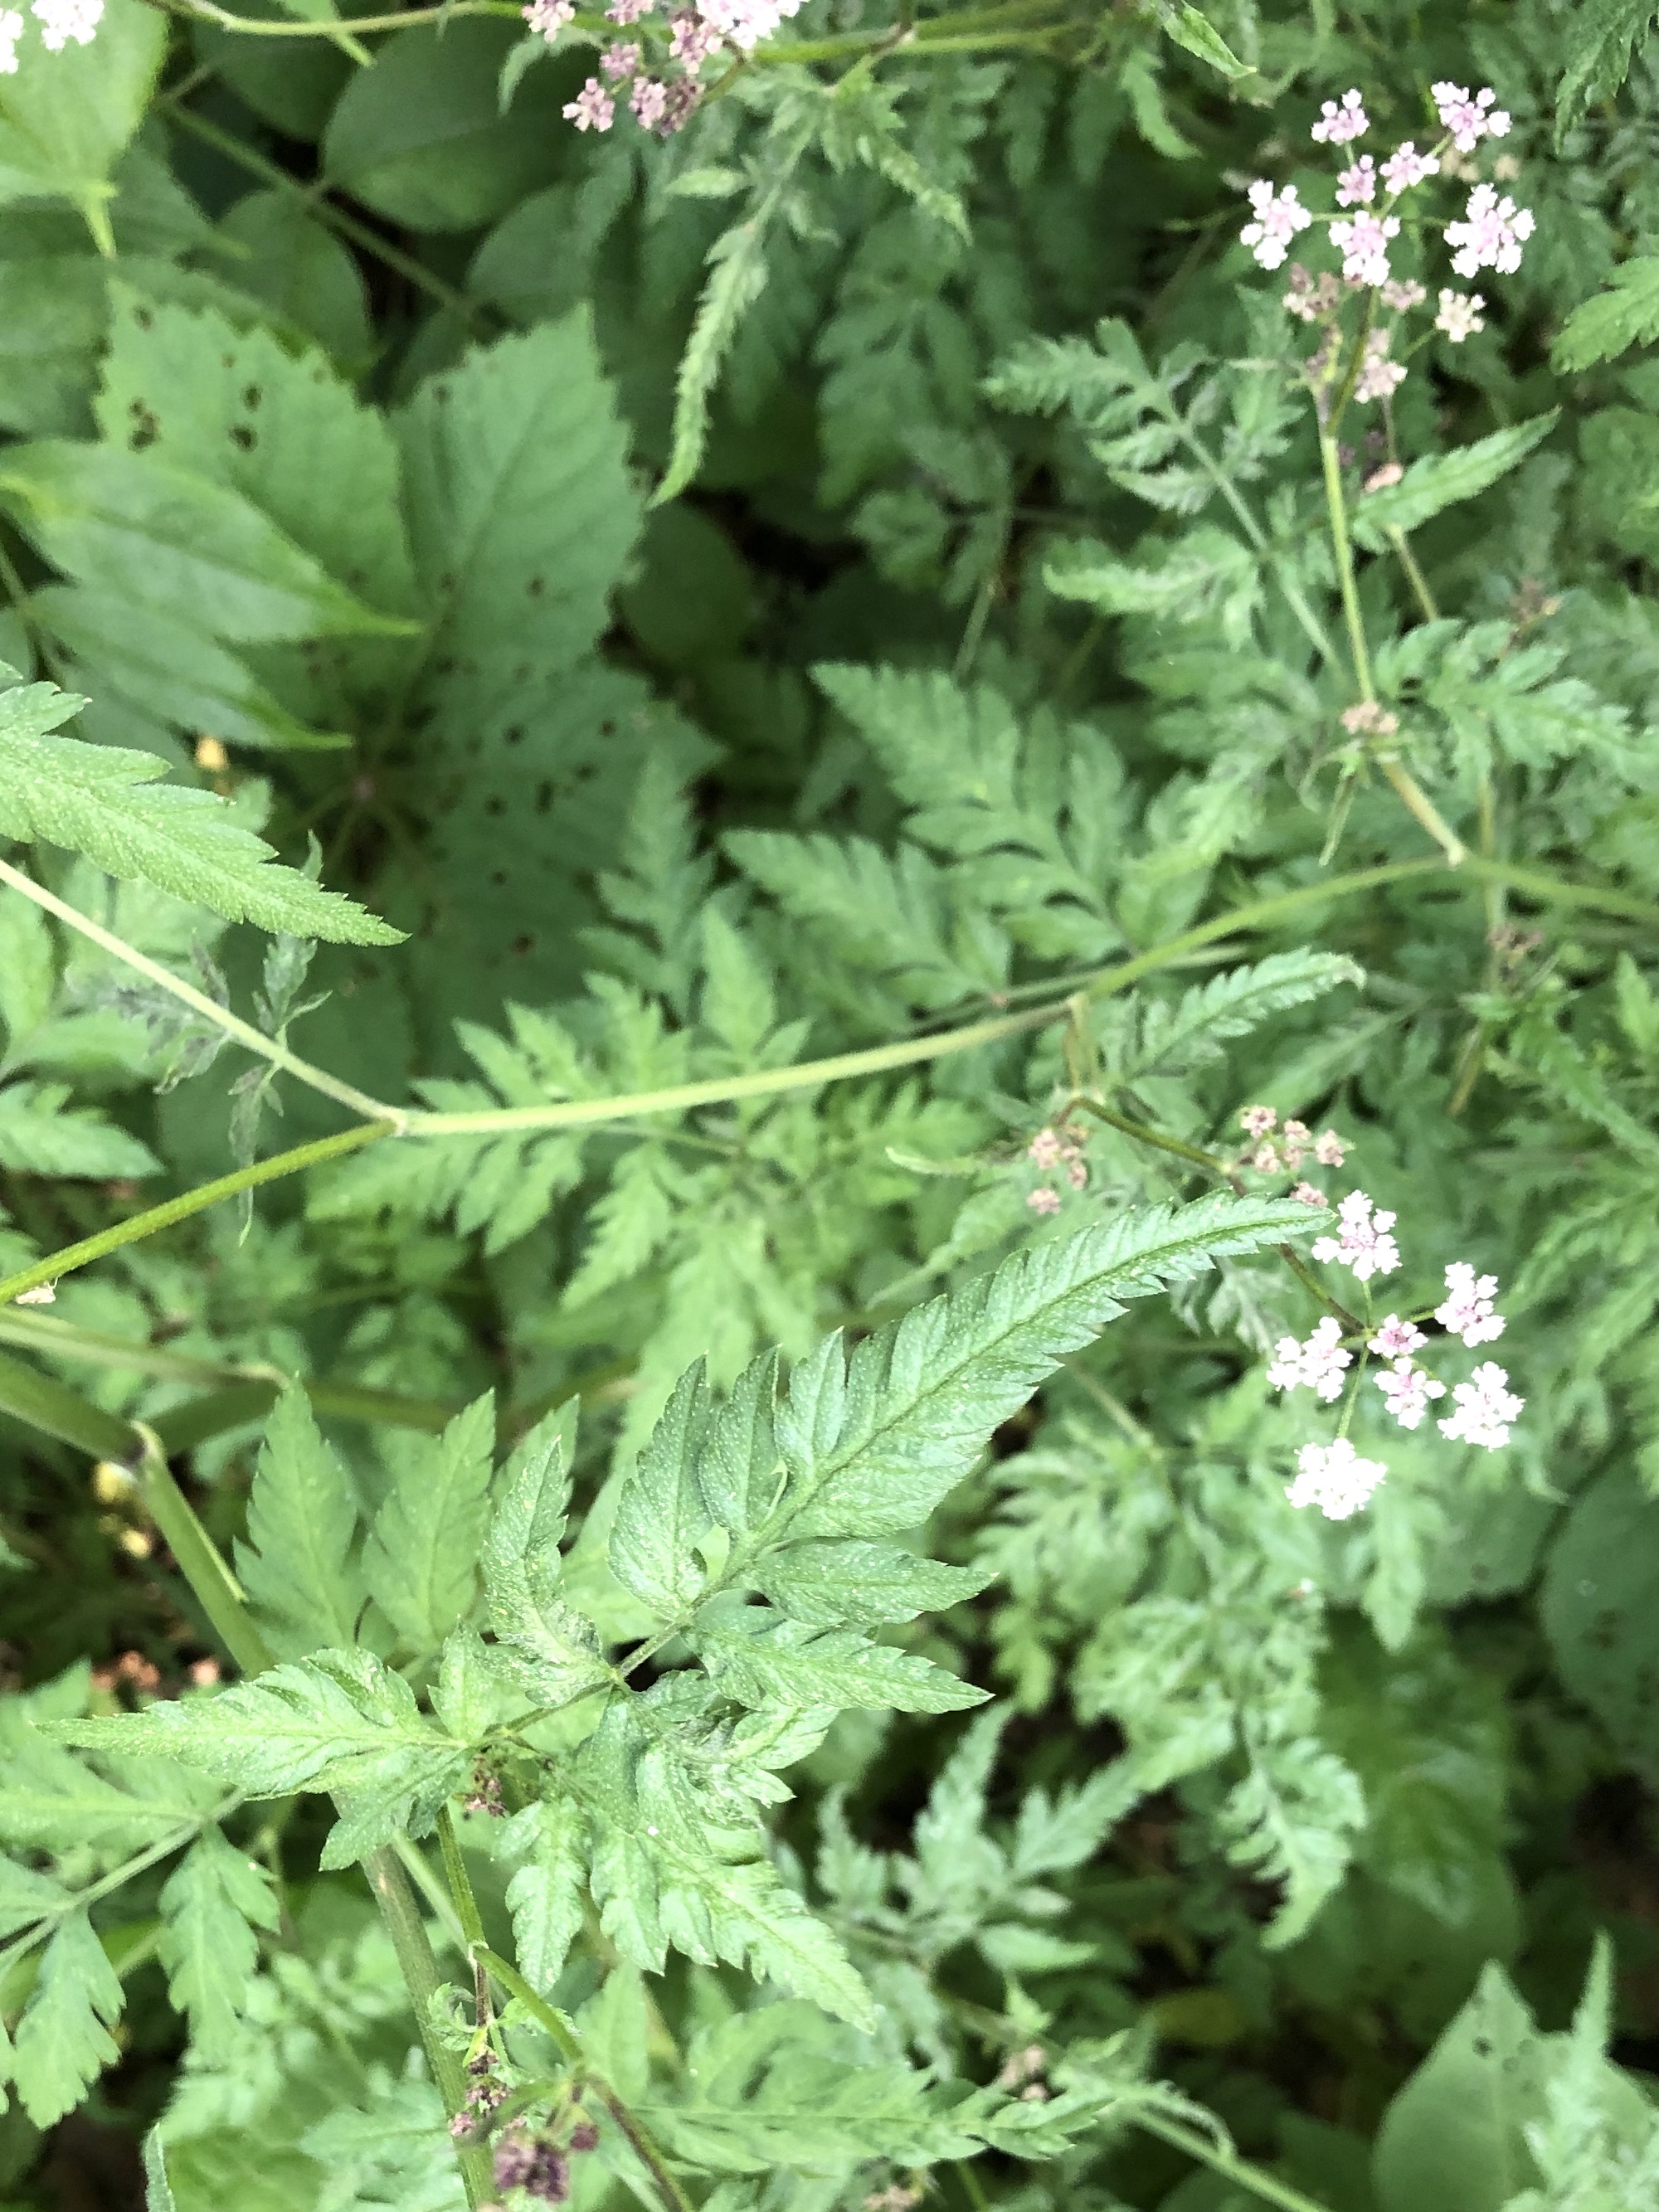 Hedge Parsley in Madison, Wisconsin on July 17, 2022.